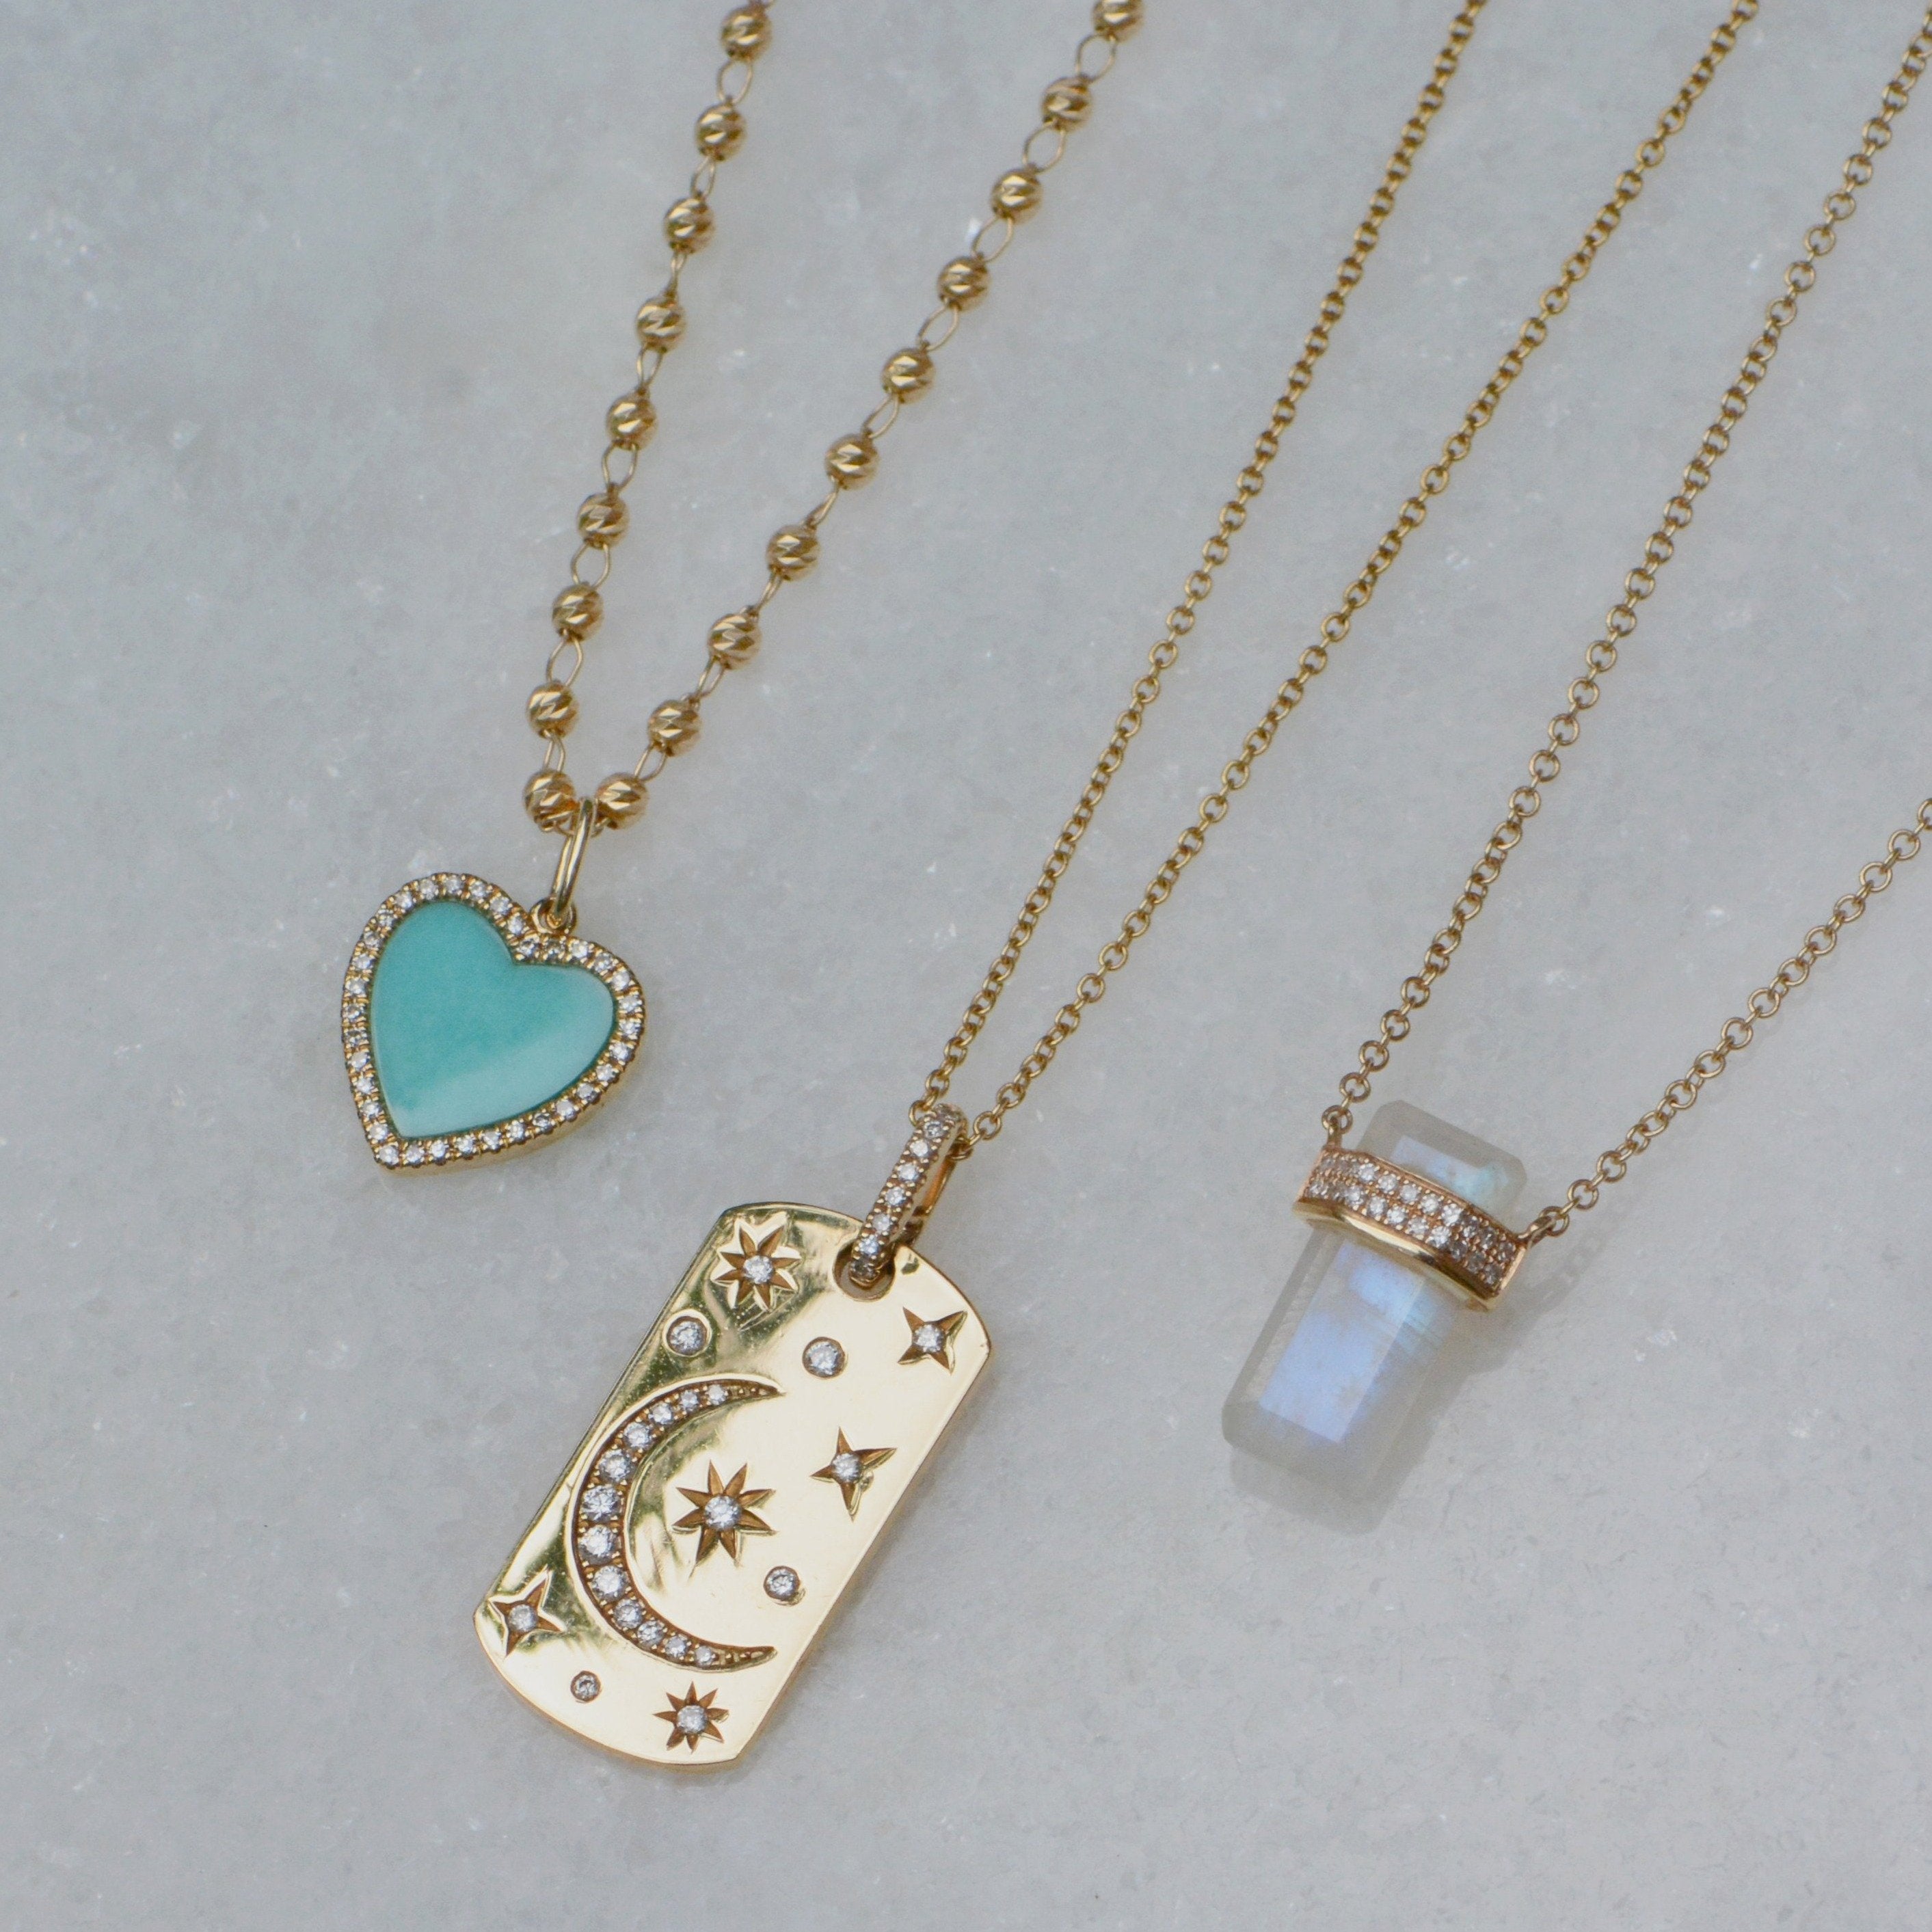 Turquoise Heart Necklace With Diamonds on Paperclip Link Chain 14k and Celestial Dogtag Necklace and Moonstone Necklace